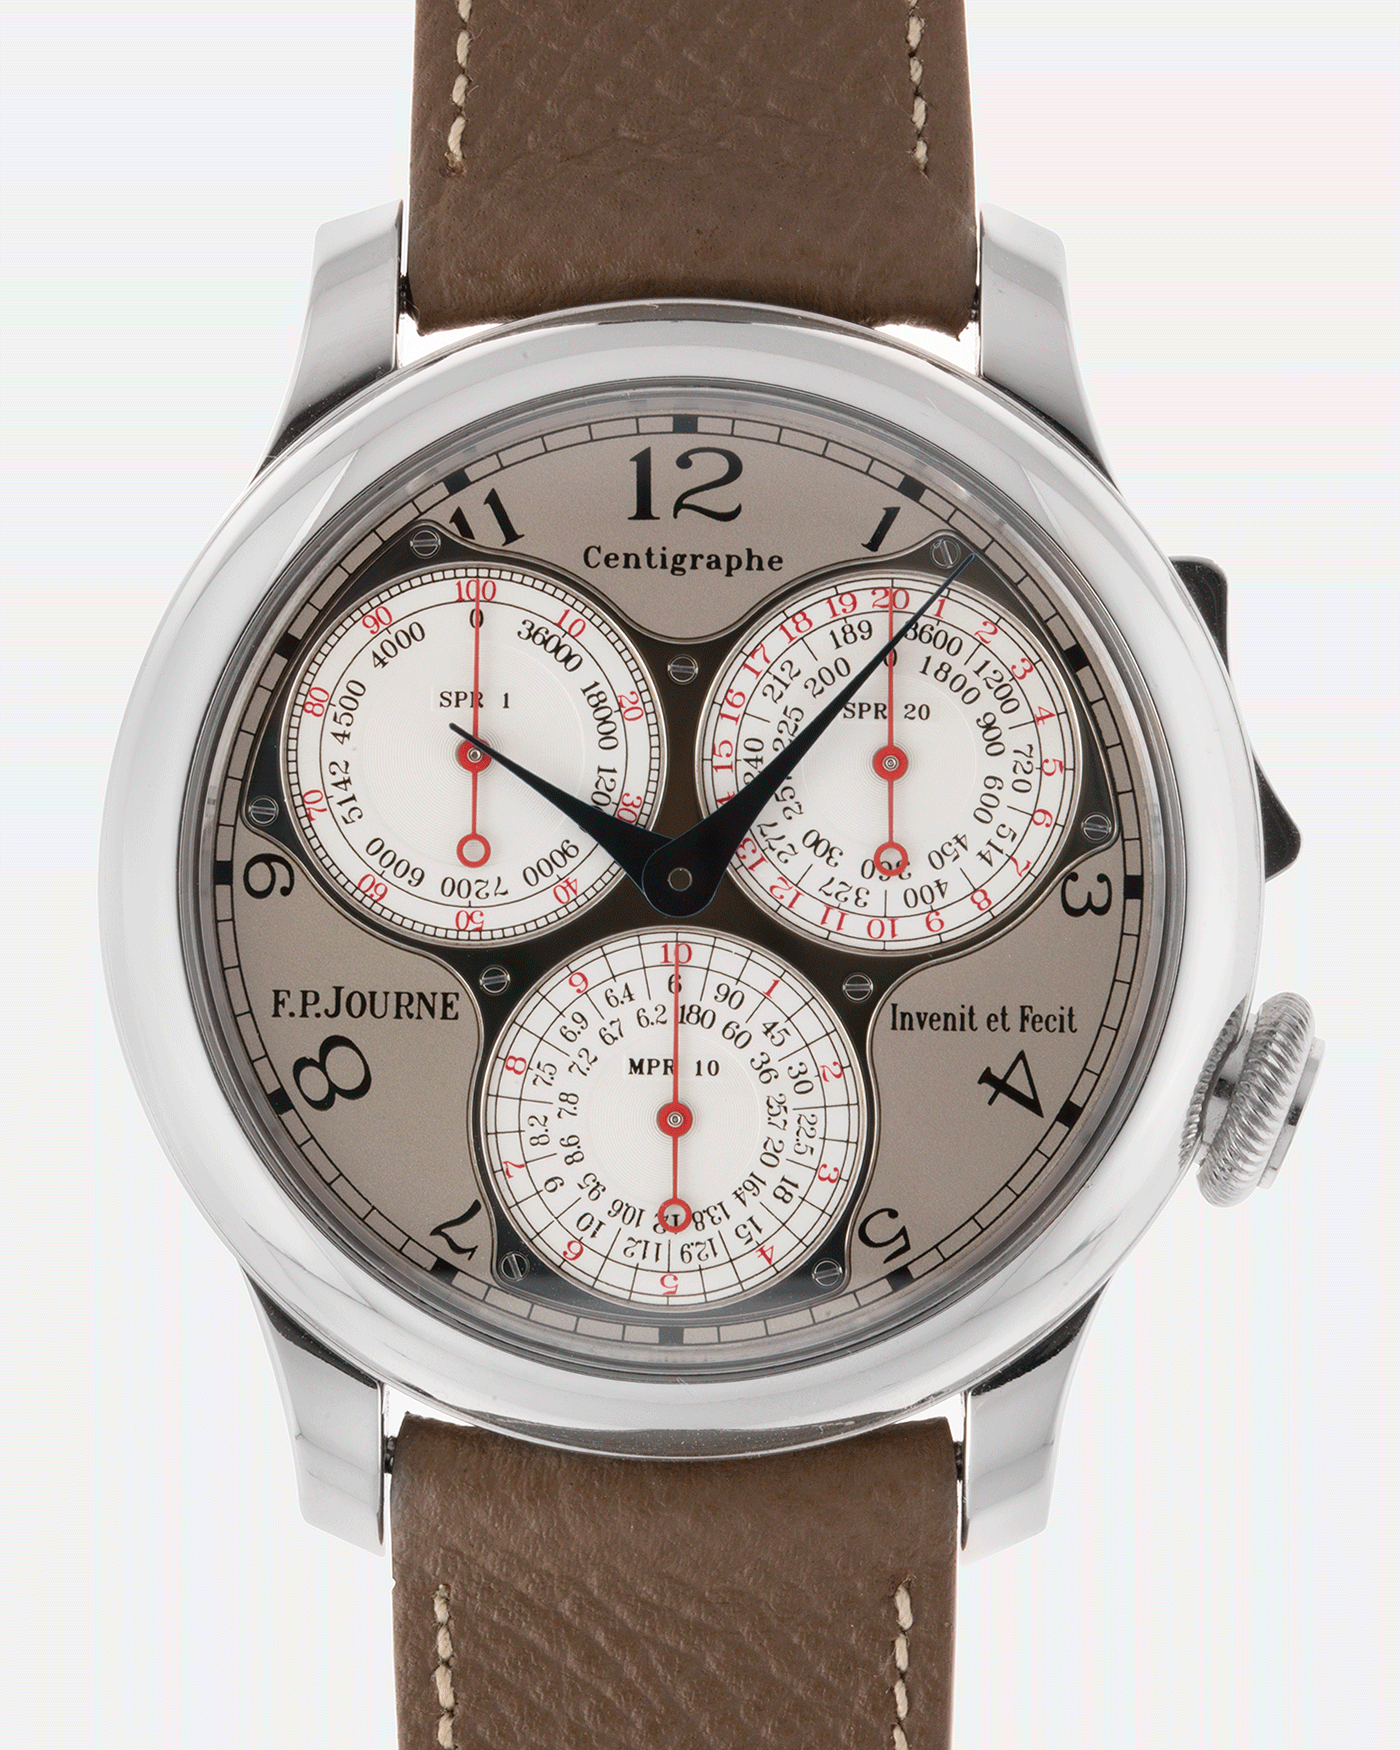 F.P. Journe Centigraphe Souverain Independent Watch | S.Song Vintage Timepieces 